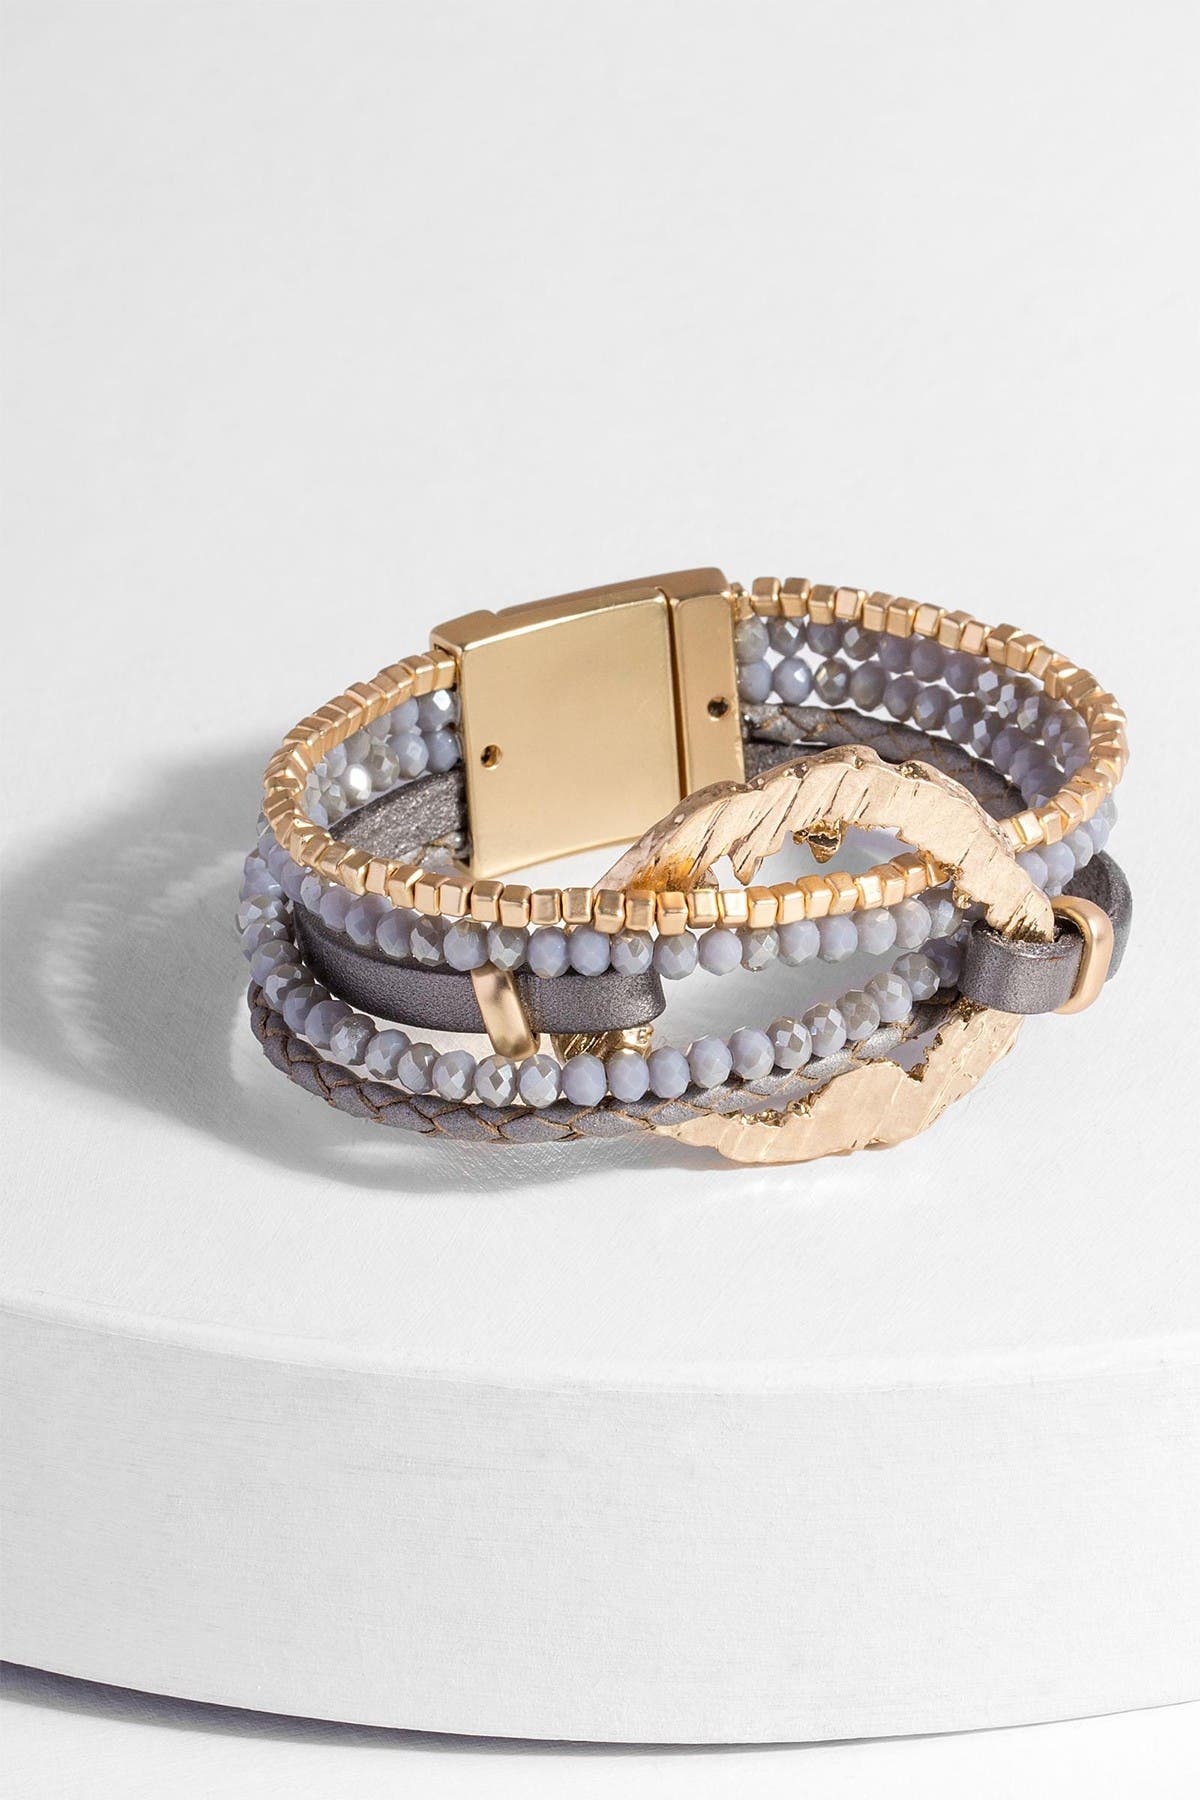 Saachi Earthly Flow Bracelet In Taupe